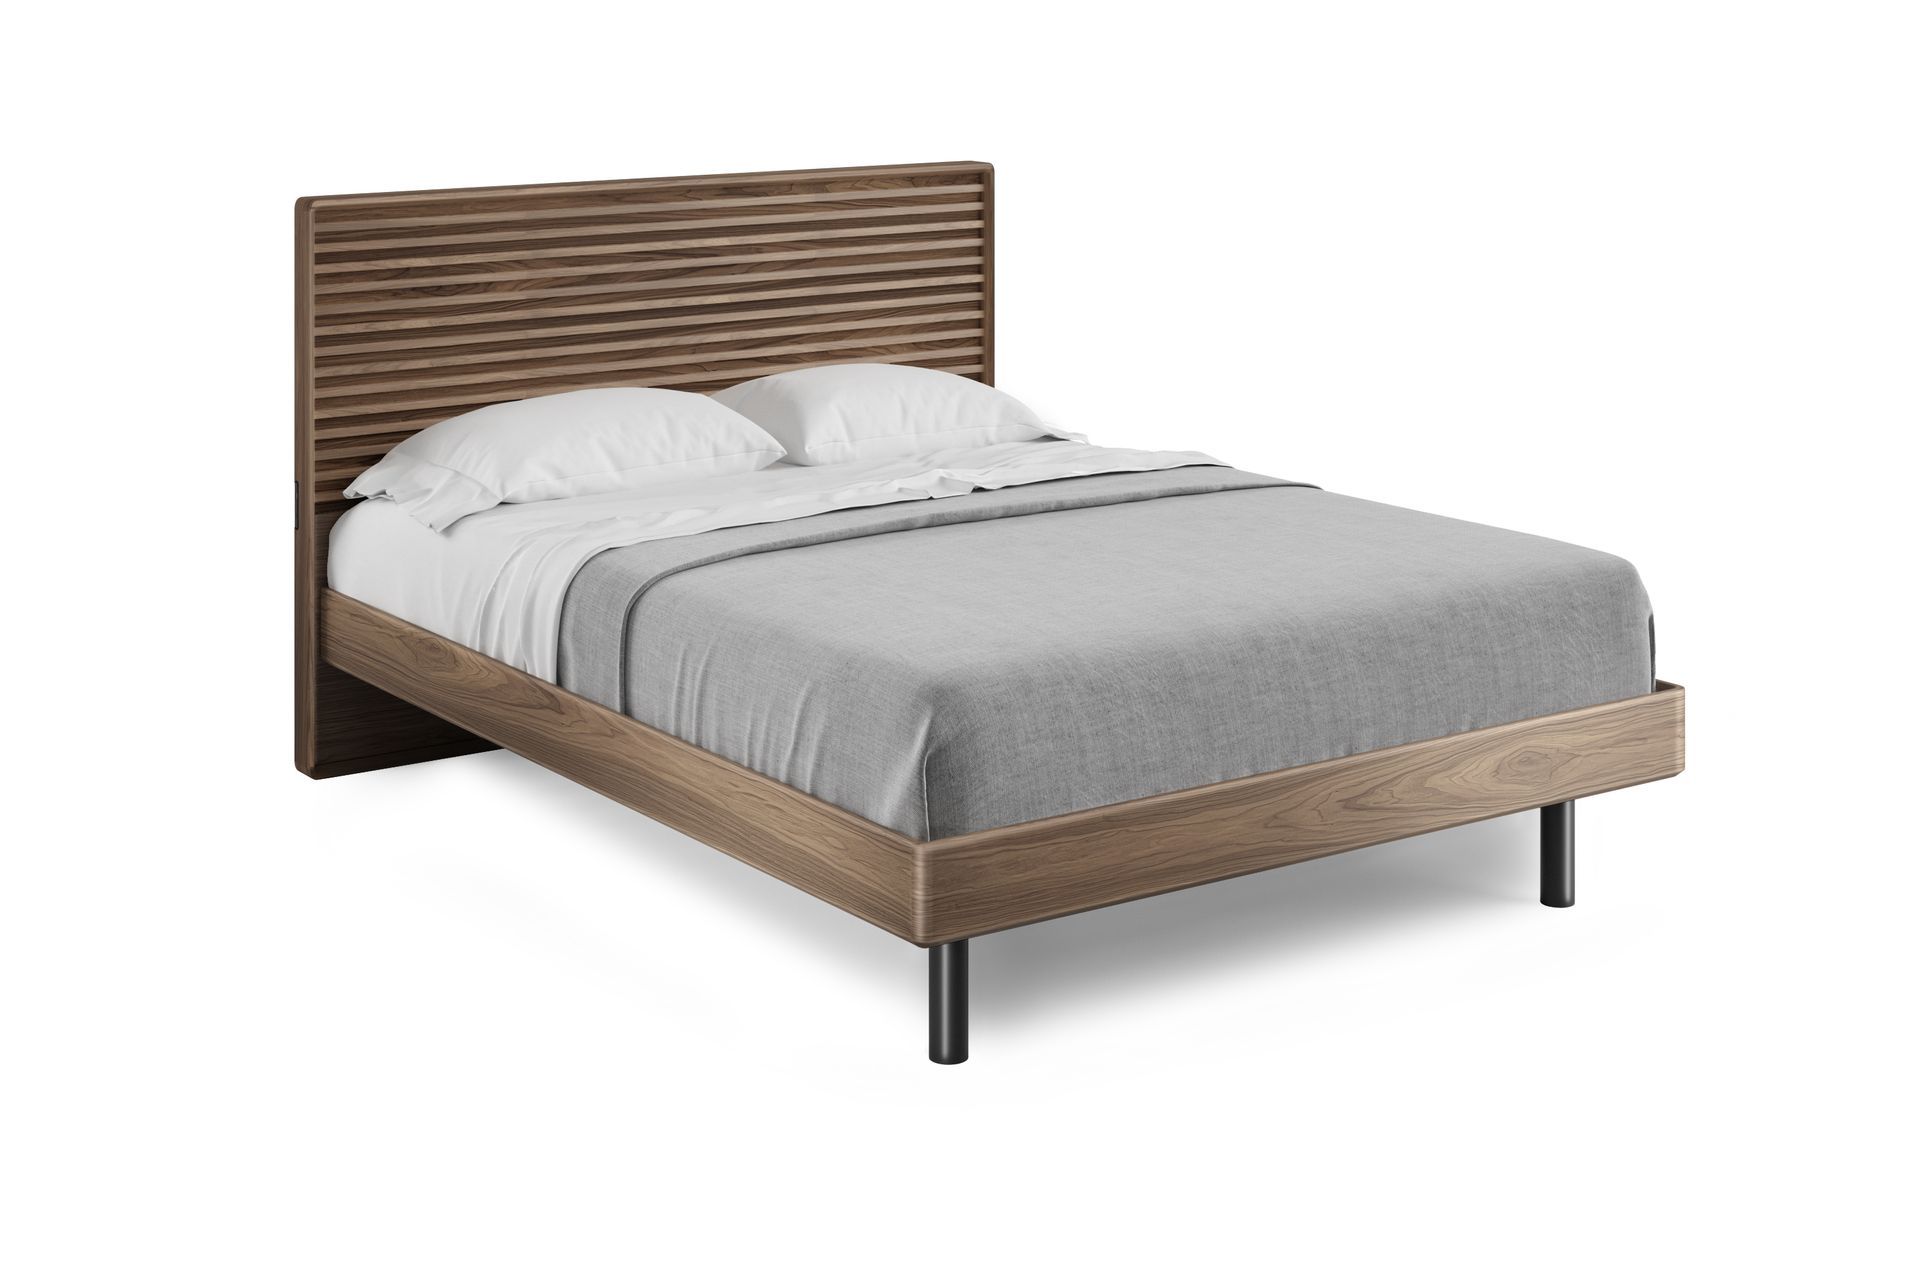 Cross-LINQ 9127 Modern Queen Bed With Charging Stations | BDI Furniture